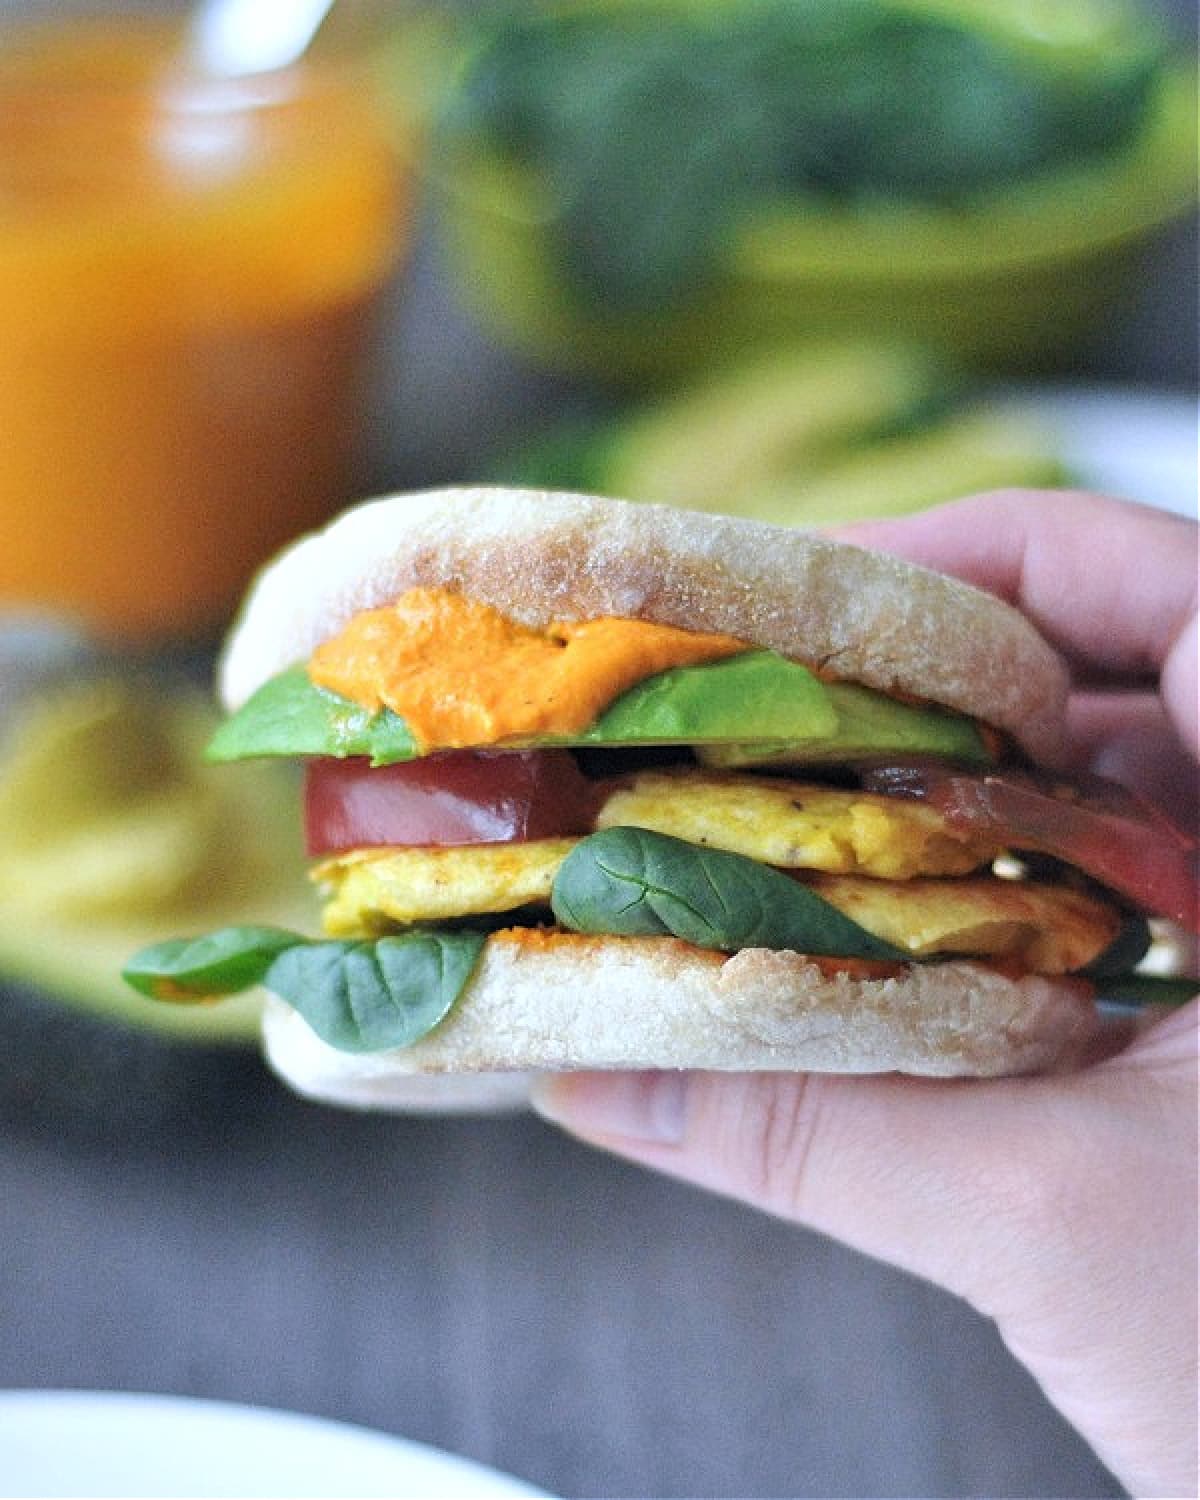 A hand holding a vegan breakfast sandwich, side view shows stacked ingredients (Romesco sauce, spinach, tomato slices, vegan "egg" or tofu, avocado slices).